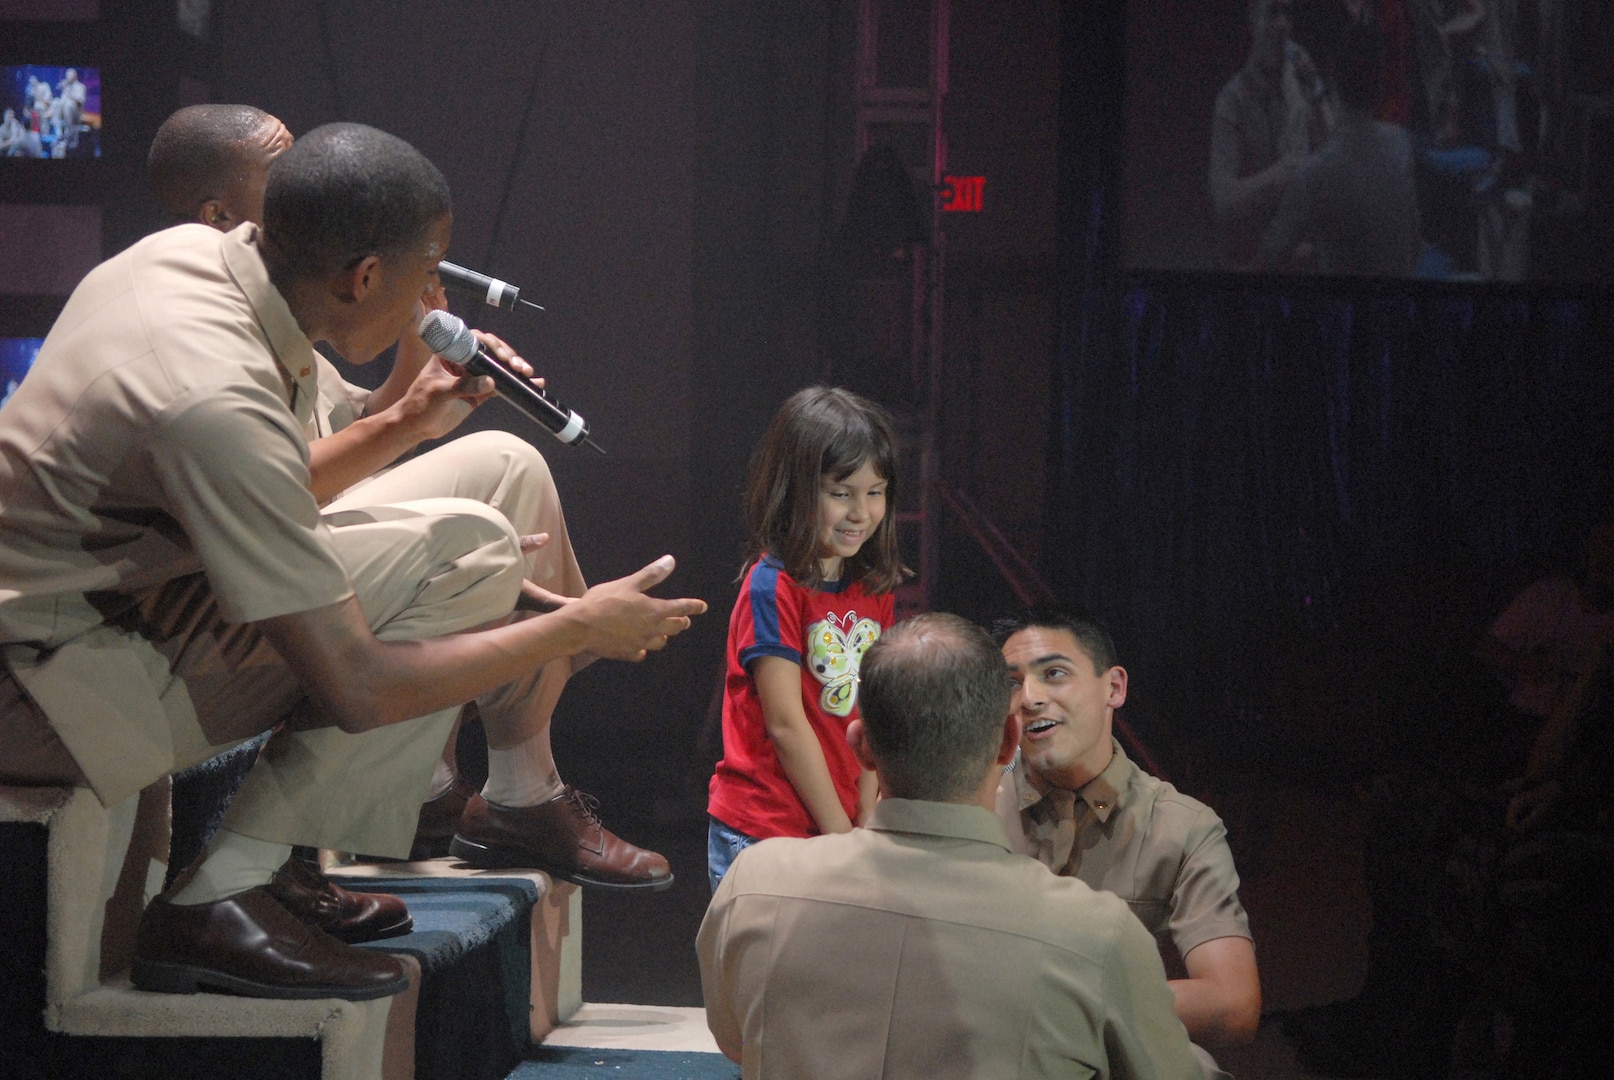 Tops In Blue fellows serenade 6-year-old Brianna Figueroa during a free concert July 4 at Bob Hope Performing Arts Center on Lackland Air Force Base, Texas. The performance was moved indoors due to inclement weather. Brianna is the daughter of Tech. Sgt. Ernesto Figueroa from the Inter-American Air Forces Academy. (USAF photo by Alan Boedeker)